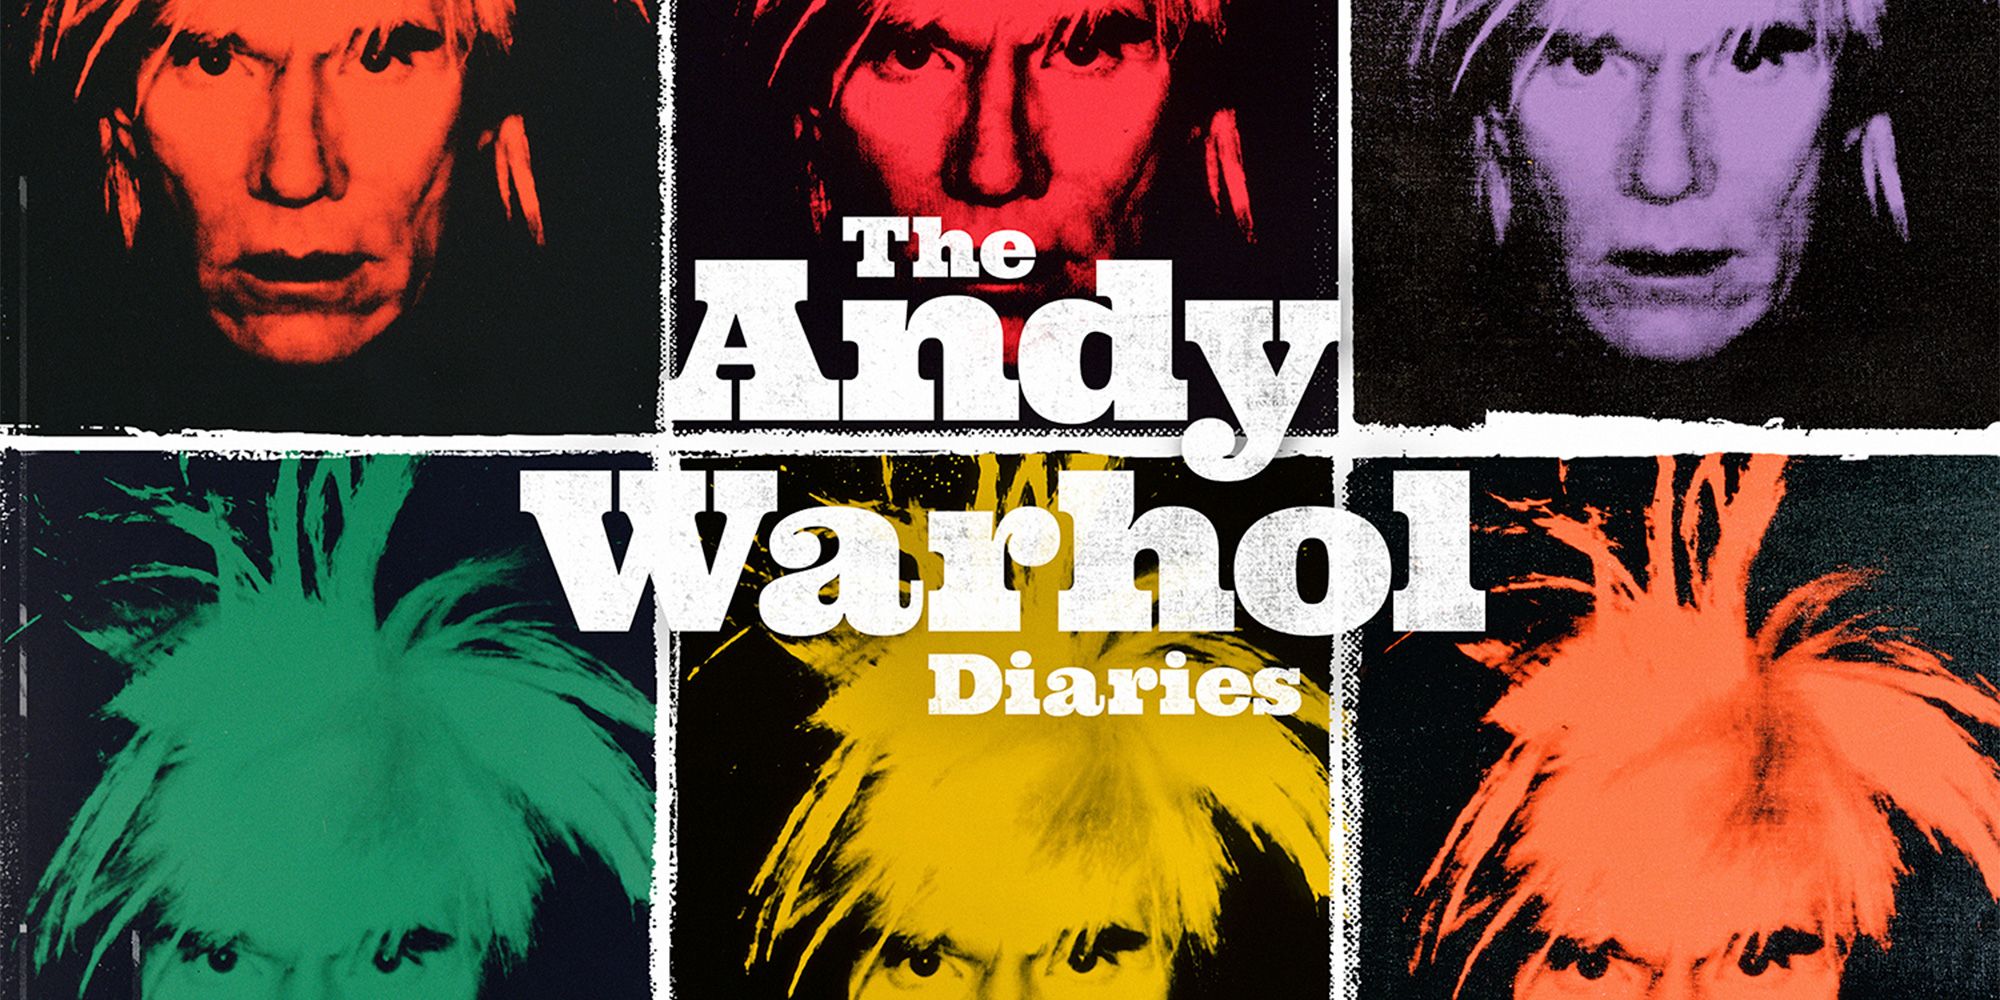 Andy Warhol portraits in different colors, a cover for the Andy Warhol Diaries